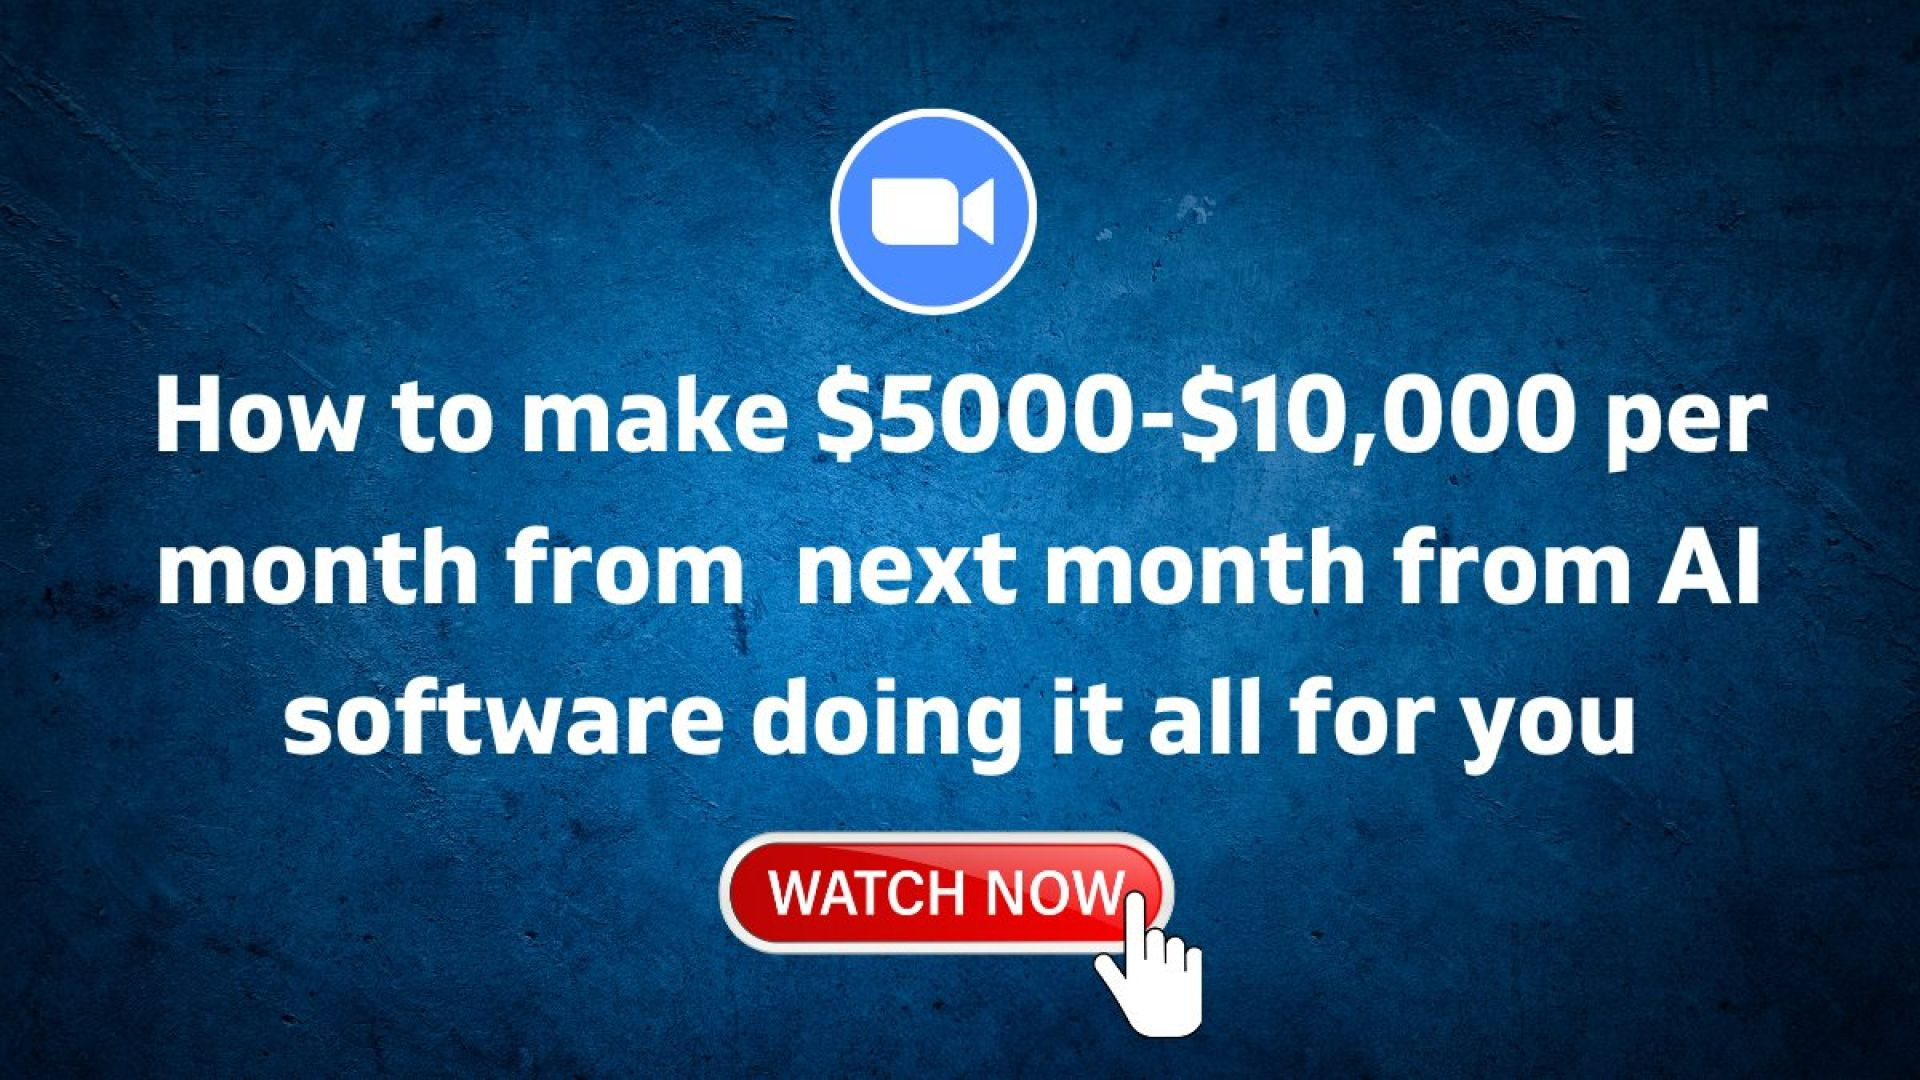 How to make $5000-$10,000 per month from  next month from AI software doing it all for you